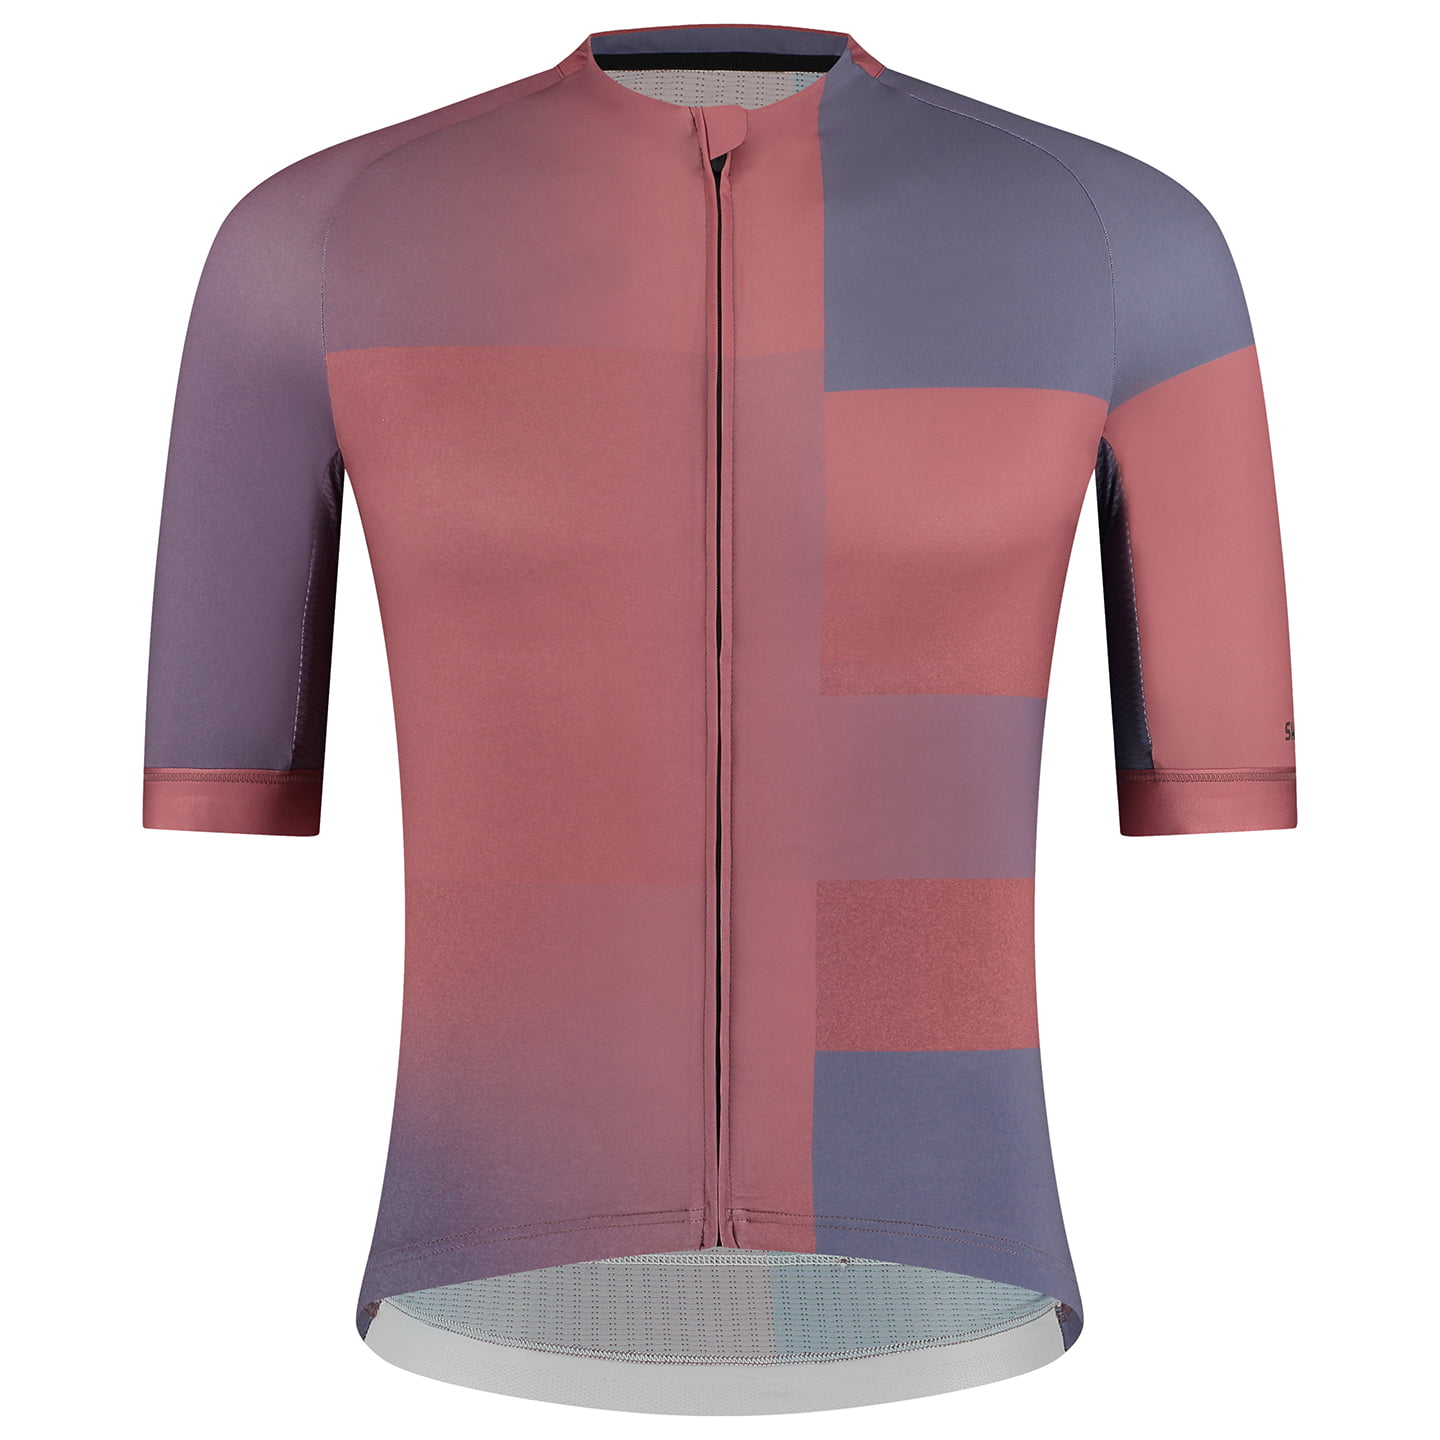 Veloce Short Sleeve Jersey Short Sleeve Jersey, for men, size 2XL, Cycling jersey, Cycle clothing